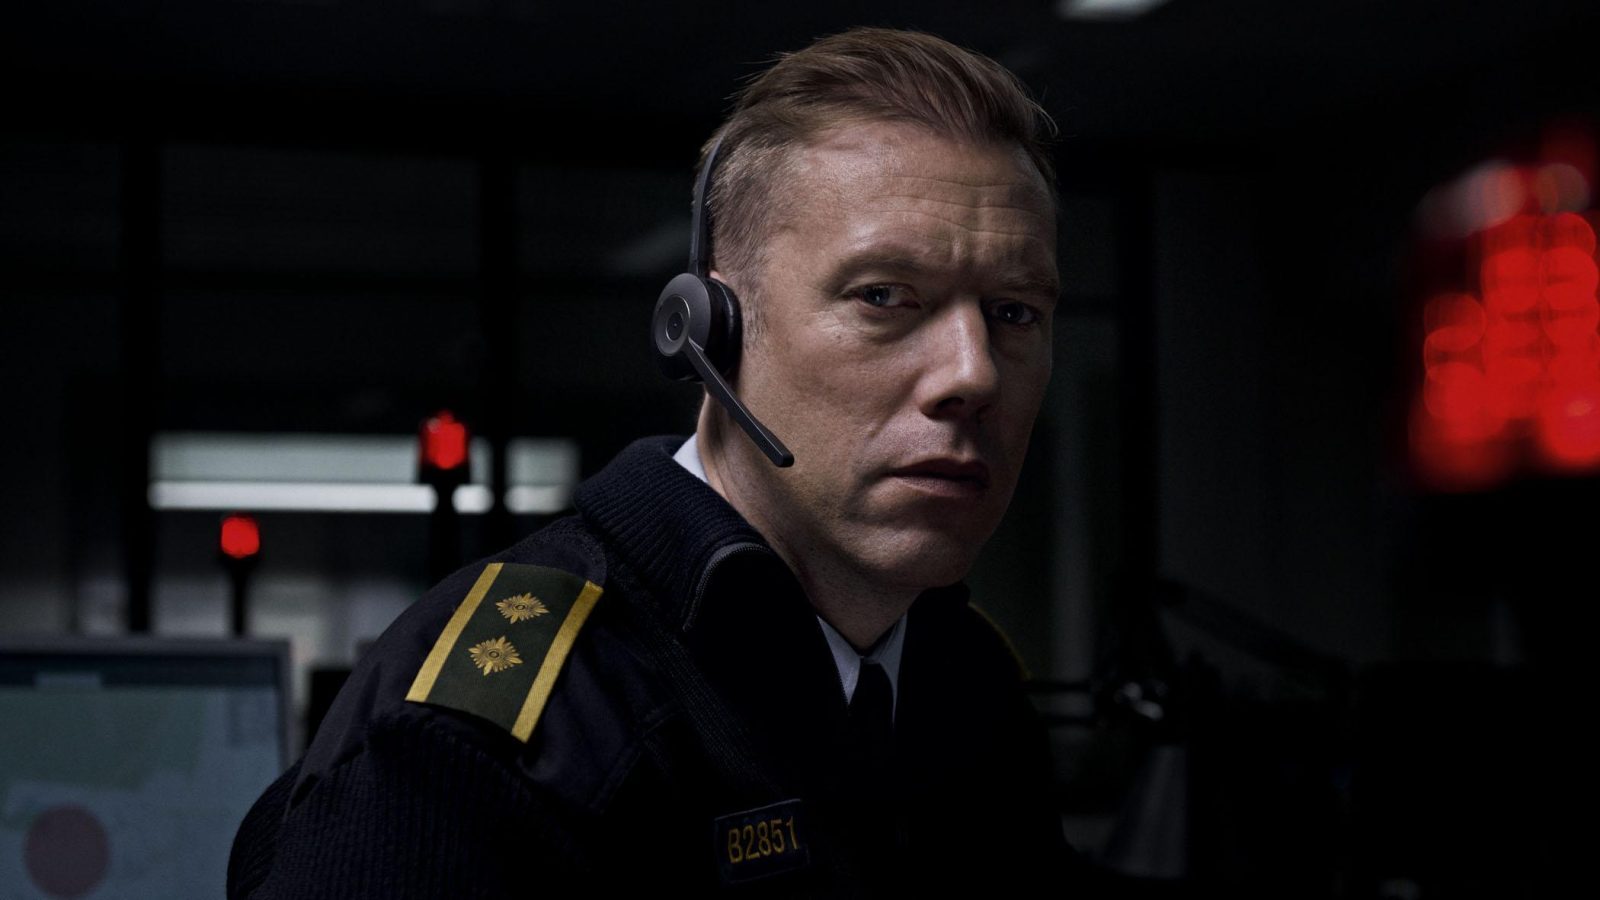 <p><span>The original </span><em><span>The Guilty</span></em><span> is a 2018 Danish film following a phone call between a dispatcher and a woman in captivity. However, the phone call drops, and the dispatcher uses his office space and the technological tool to help solve the crime and free the kidnapped woman. But as the case develops, the dispatcher and the kidnapped woman both make confessions over the phone which will leave you questioning who’s right and wrong, and the nature of humanity.</span></p>